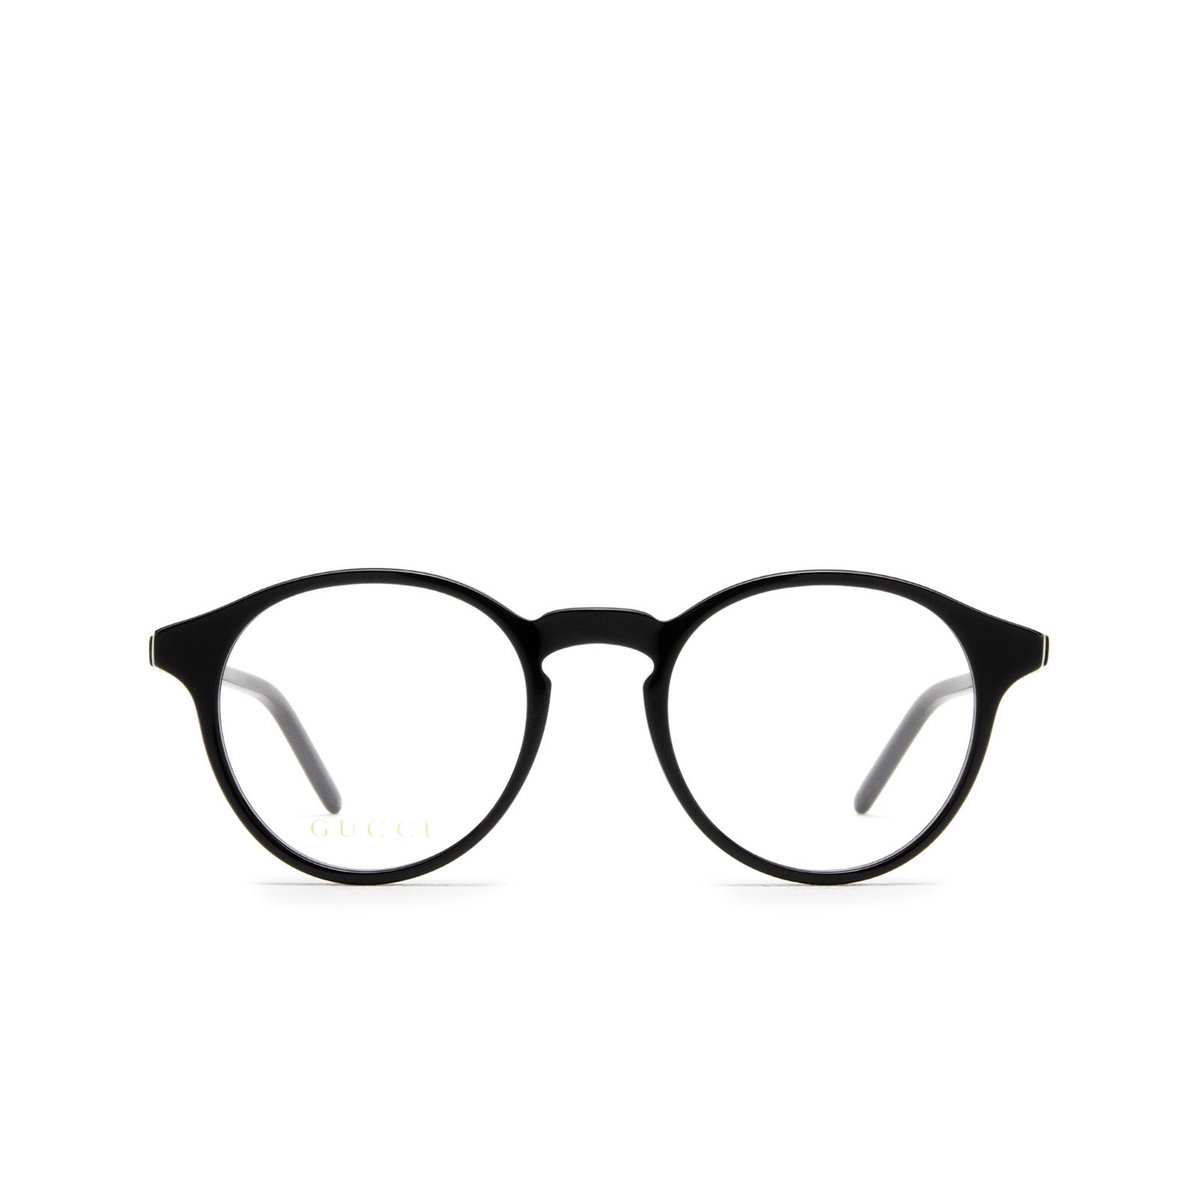 Gucci® Round Eyeglasses: GG1160O color Black 001 - front view.